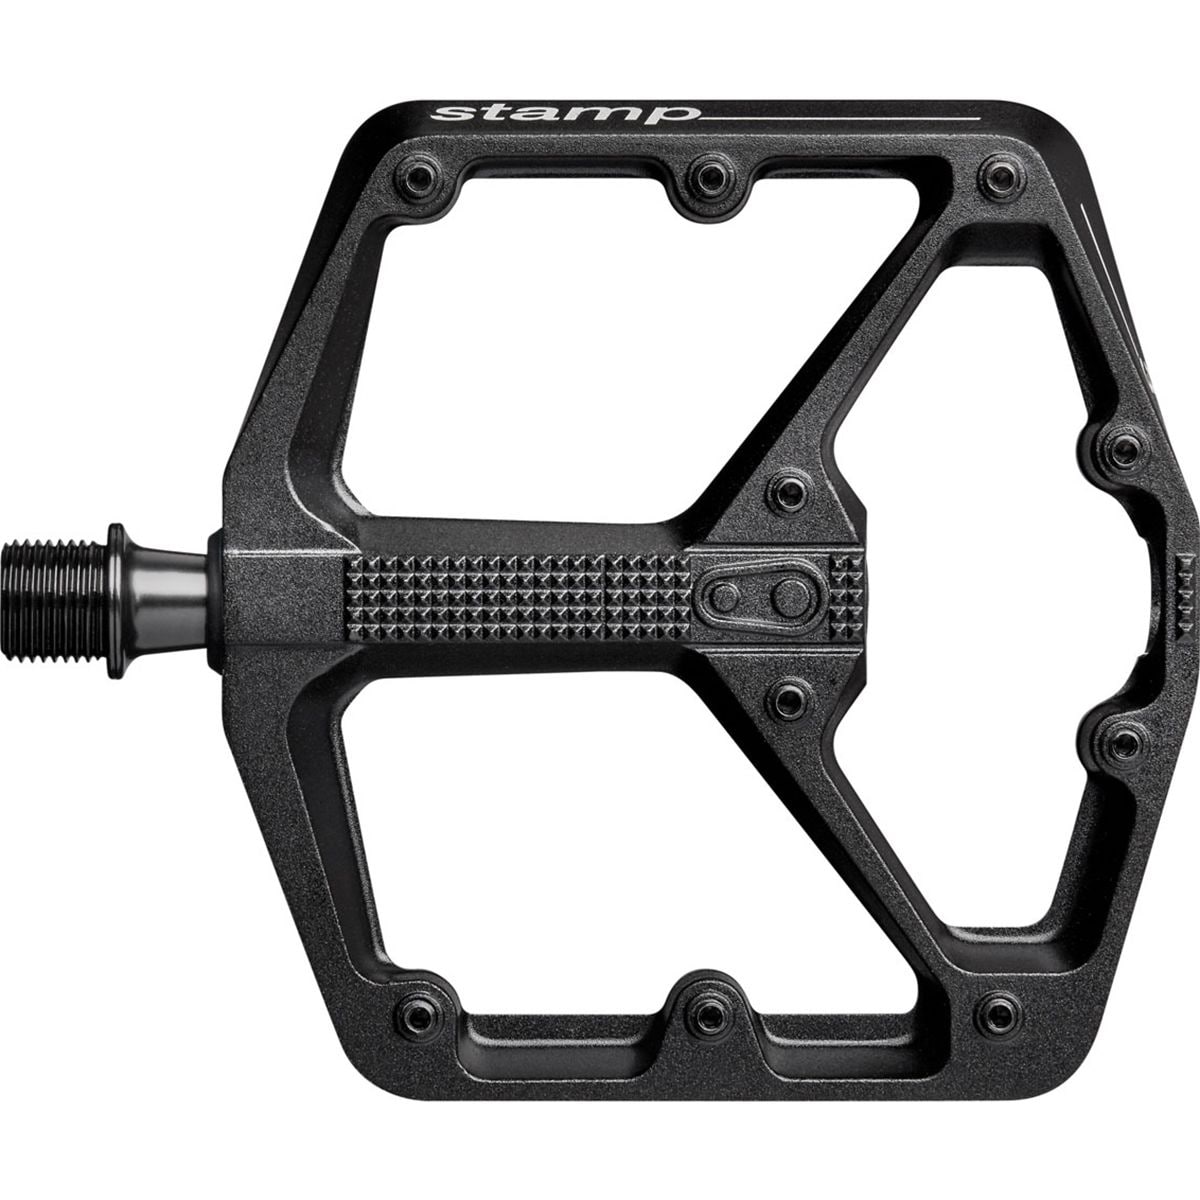 Crank Brothers Stamp 3 Pedals